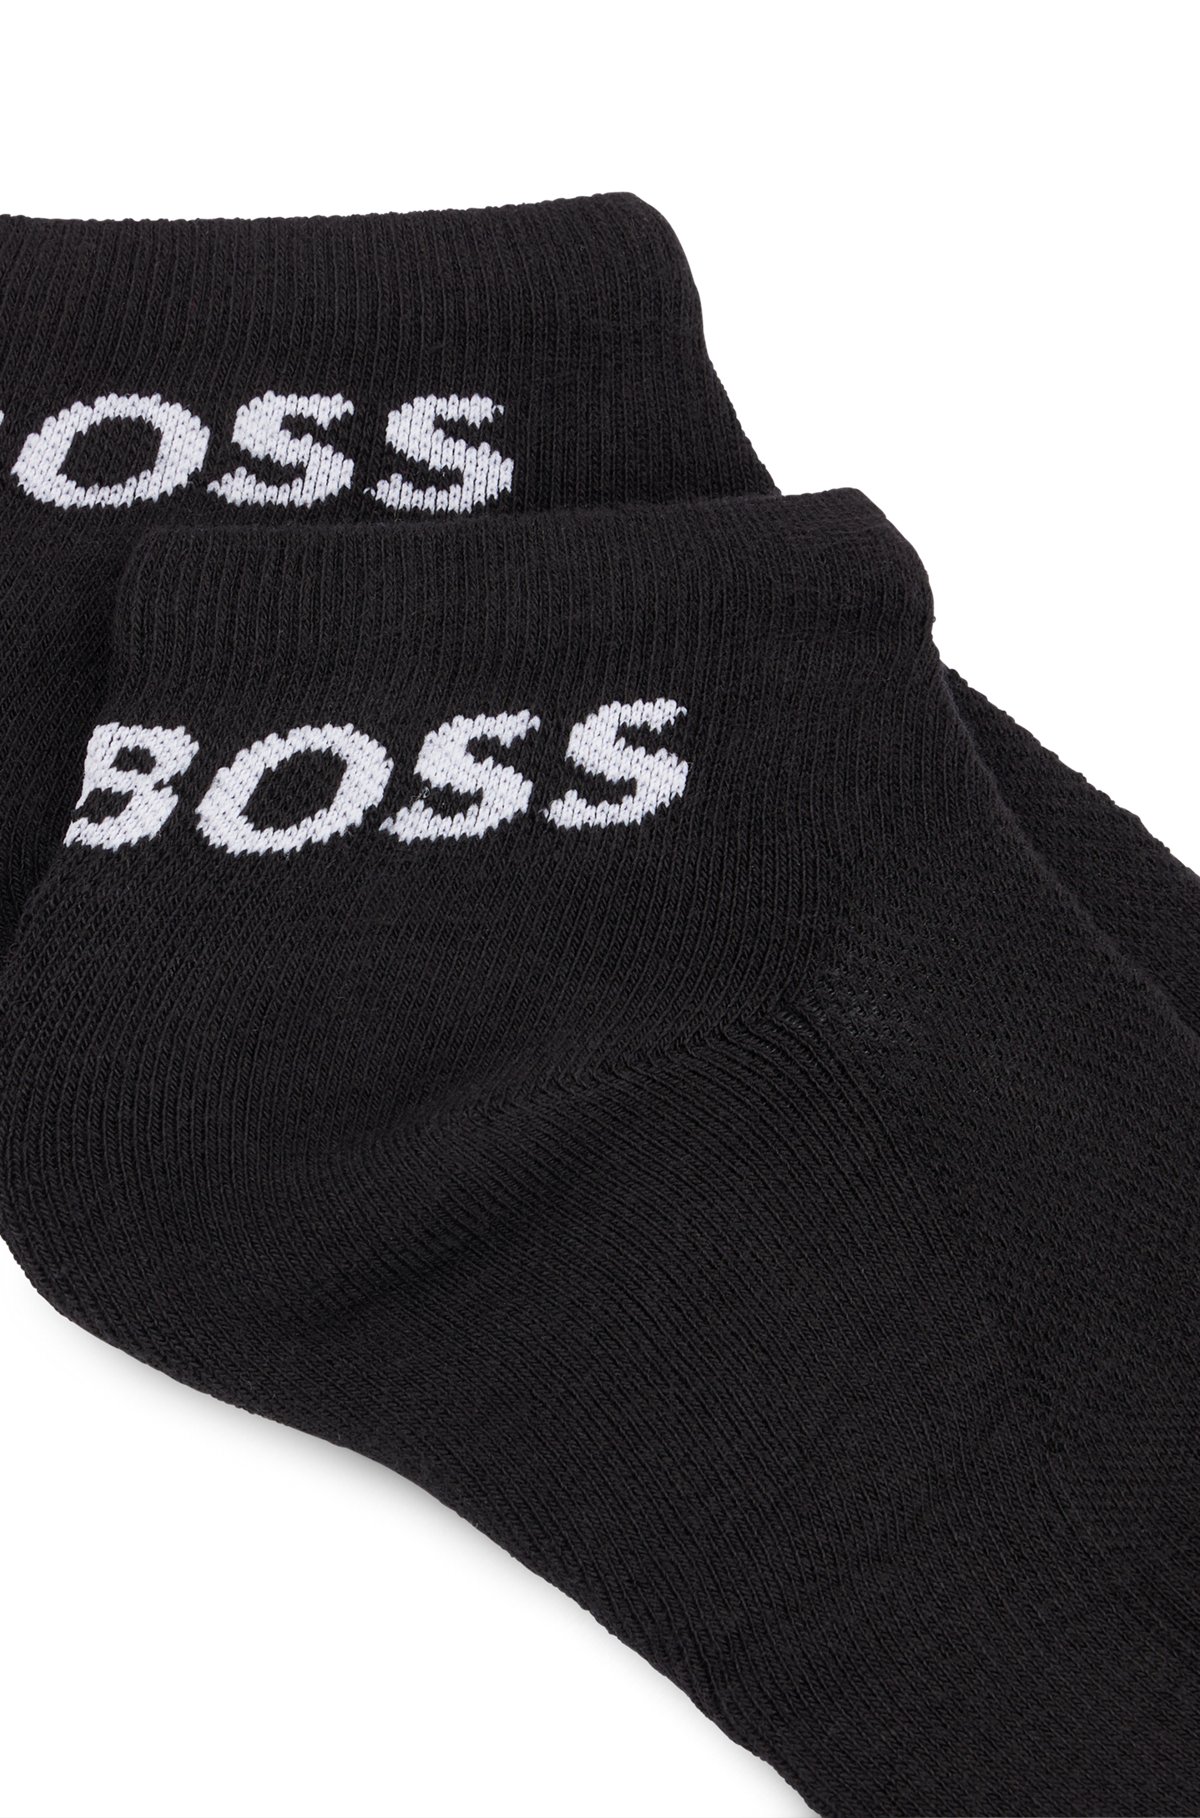 Two-pack of ankle-length socks in stretch fabric, Black